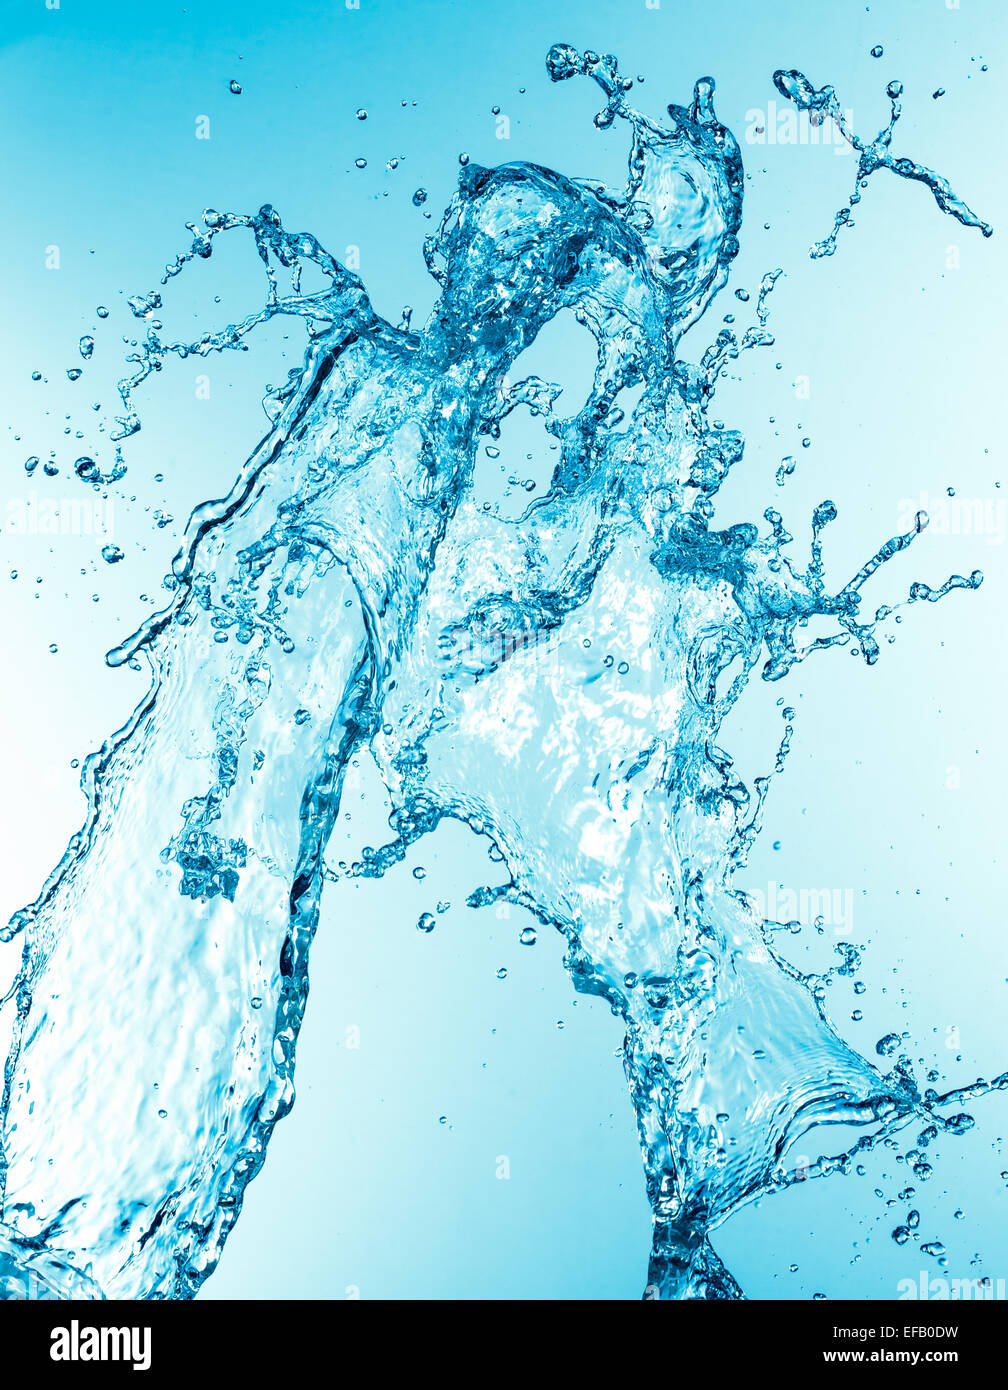 Abstract water splash on blue background. Stock Photo